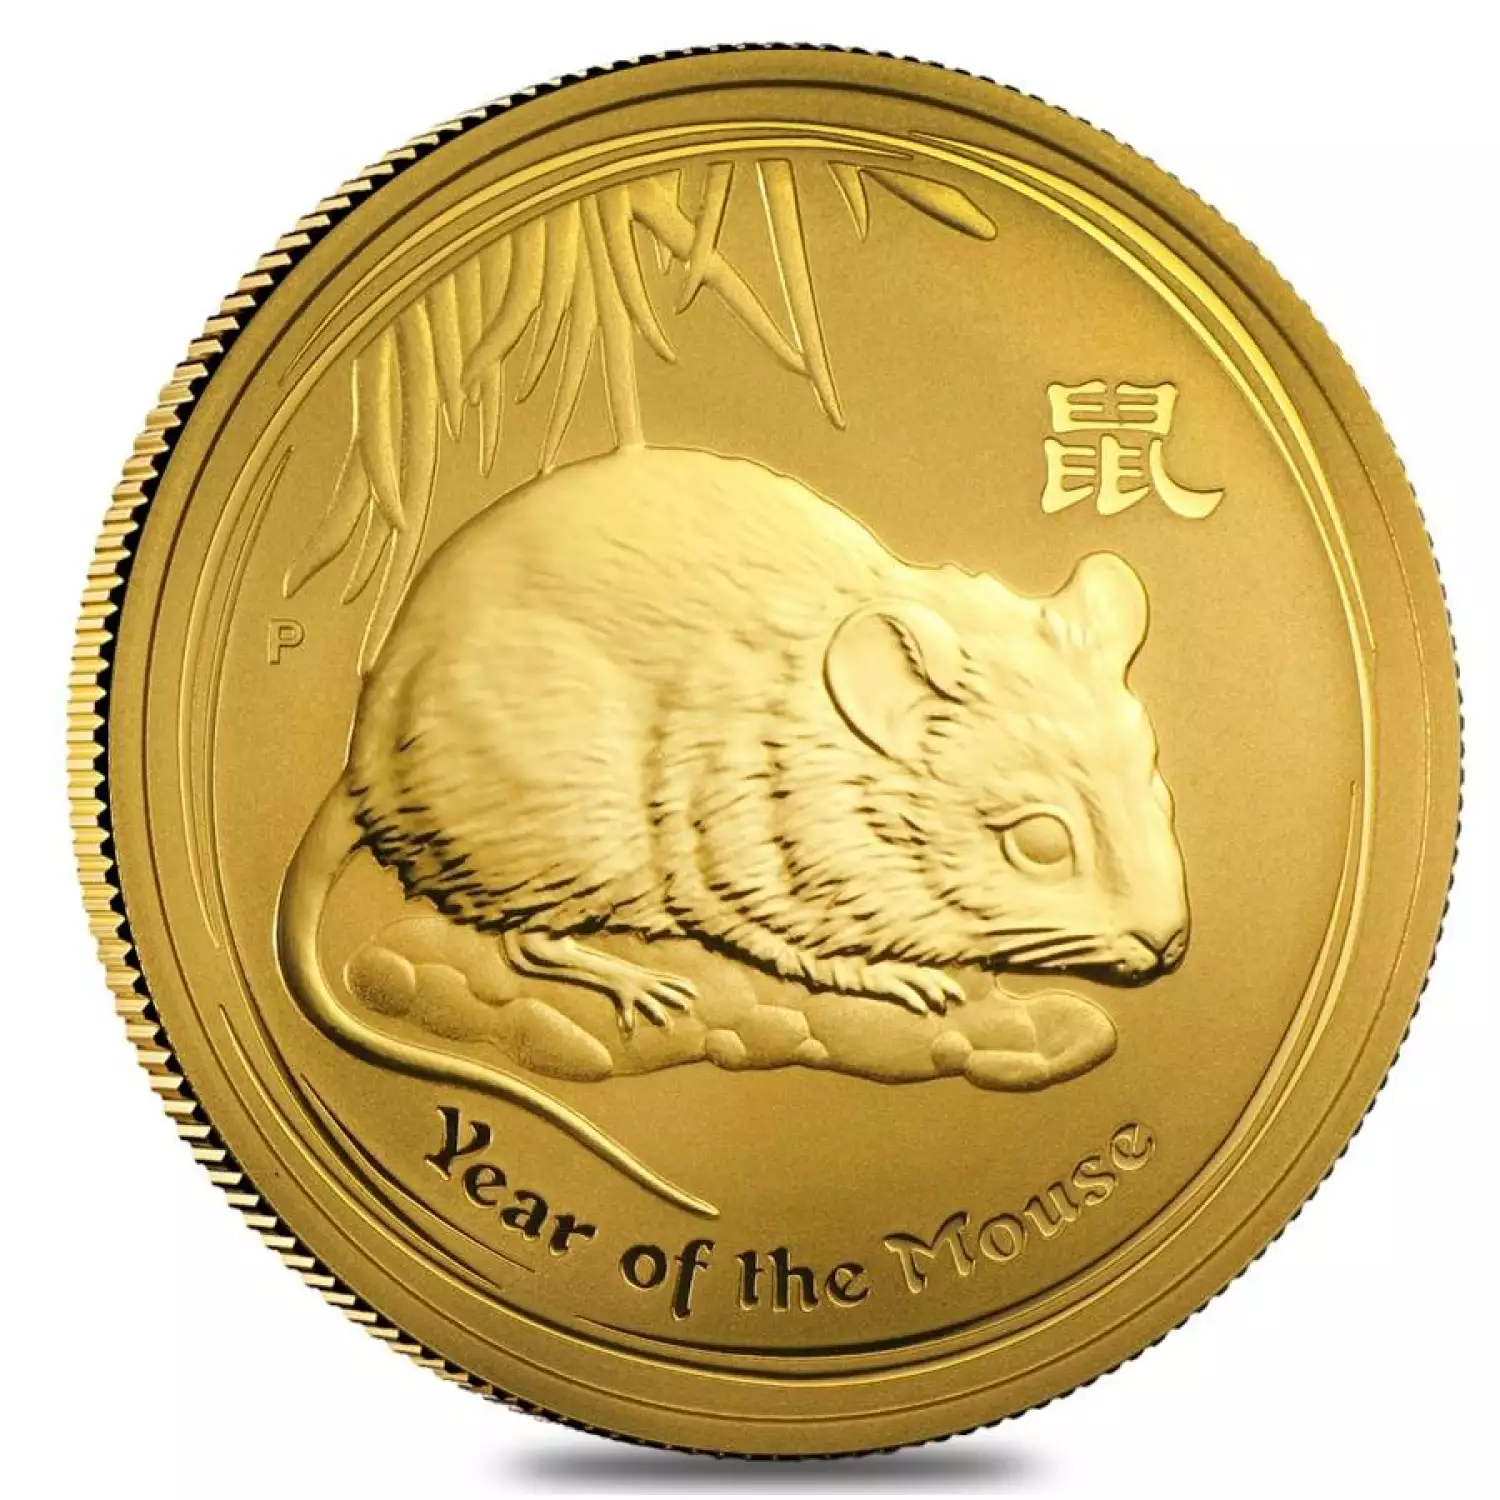 2008 1oz Australian Perth Mint Gold Lunar II: Year of the Mouse (2)